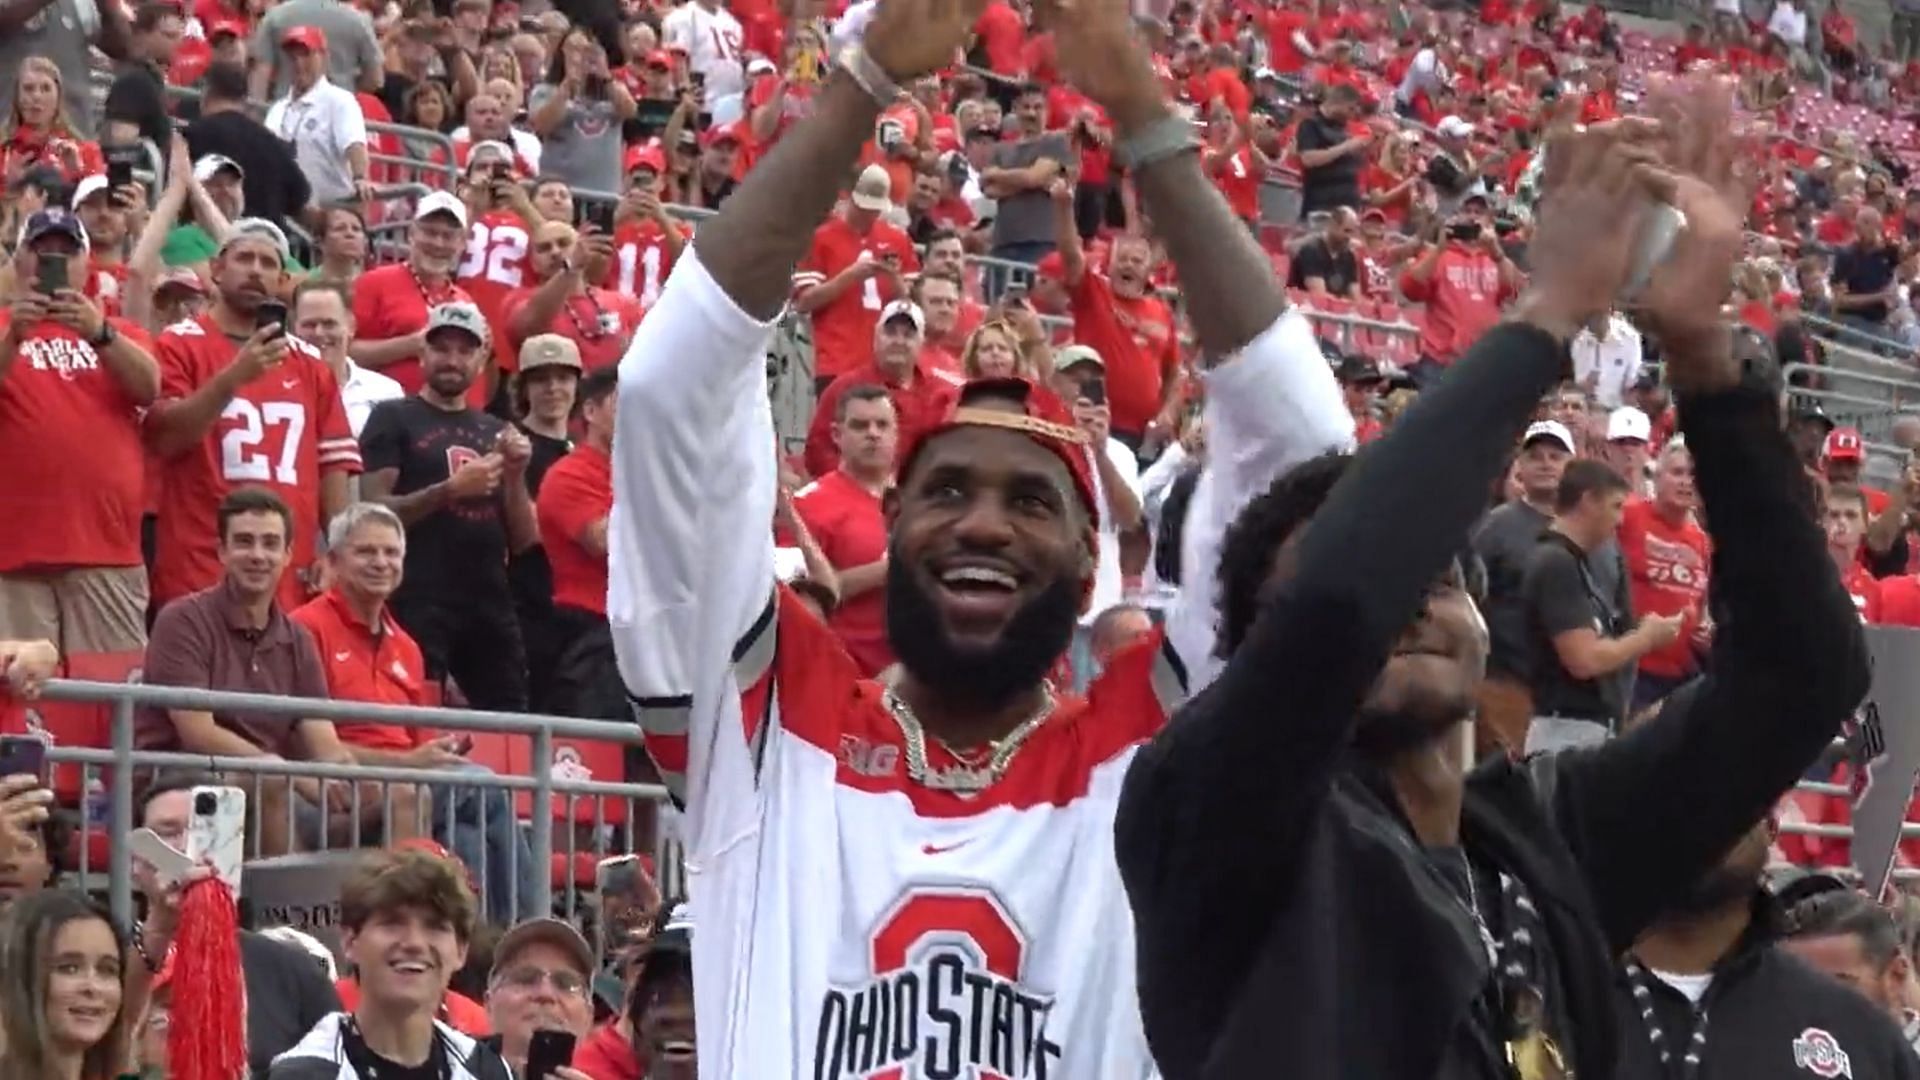 Lebron and his son Bronny attended the Ohio State-Notre Dame football game.